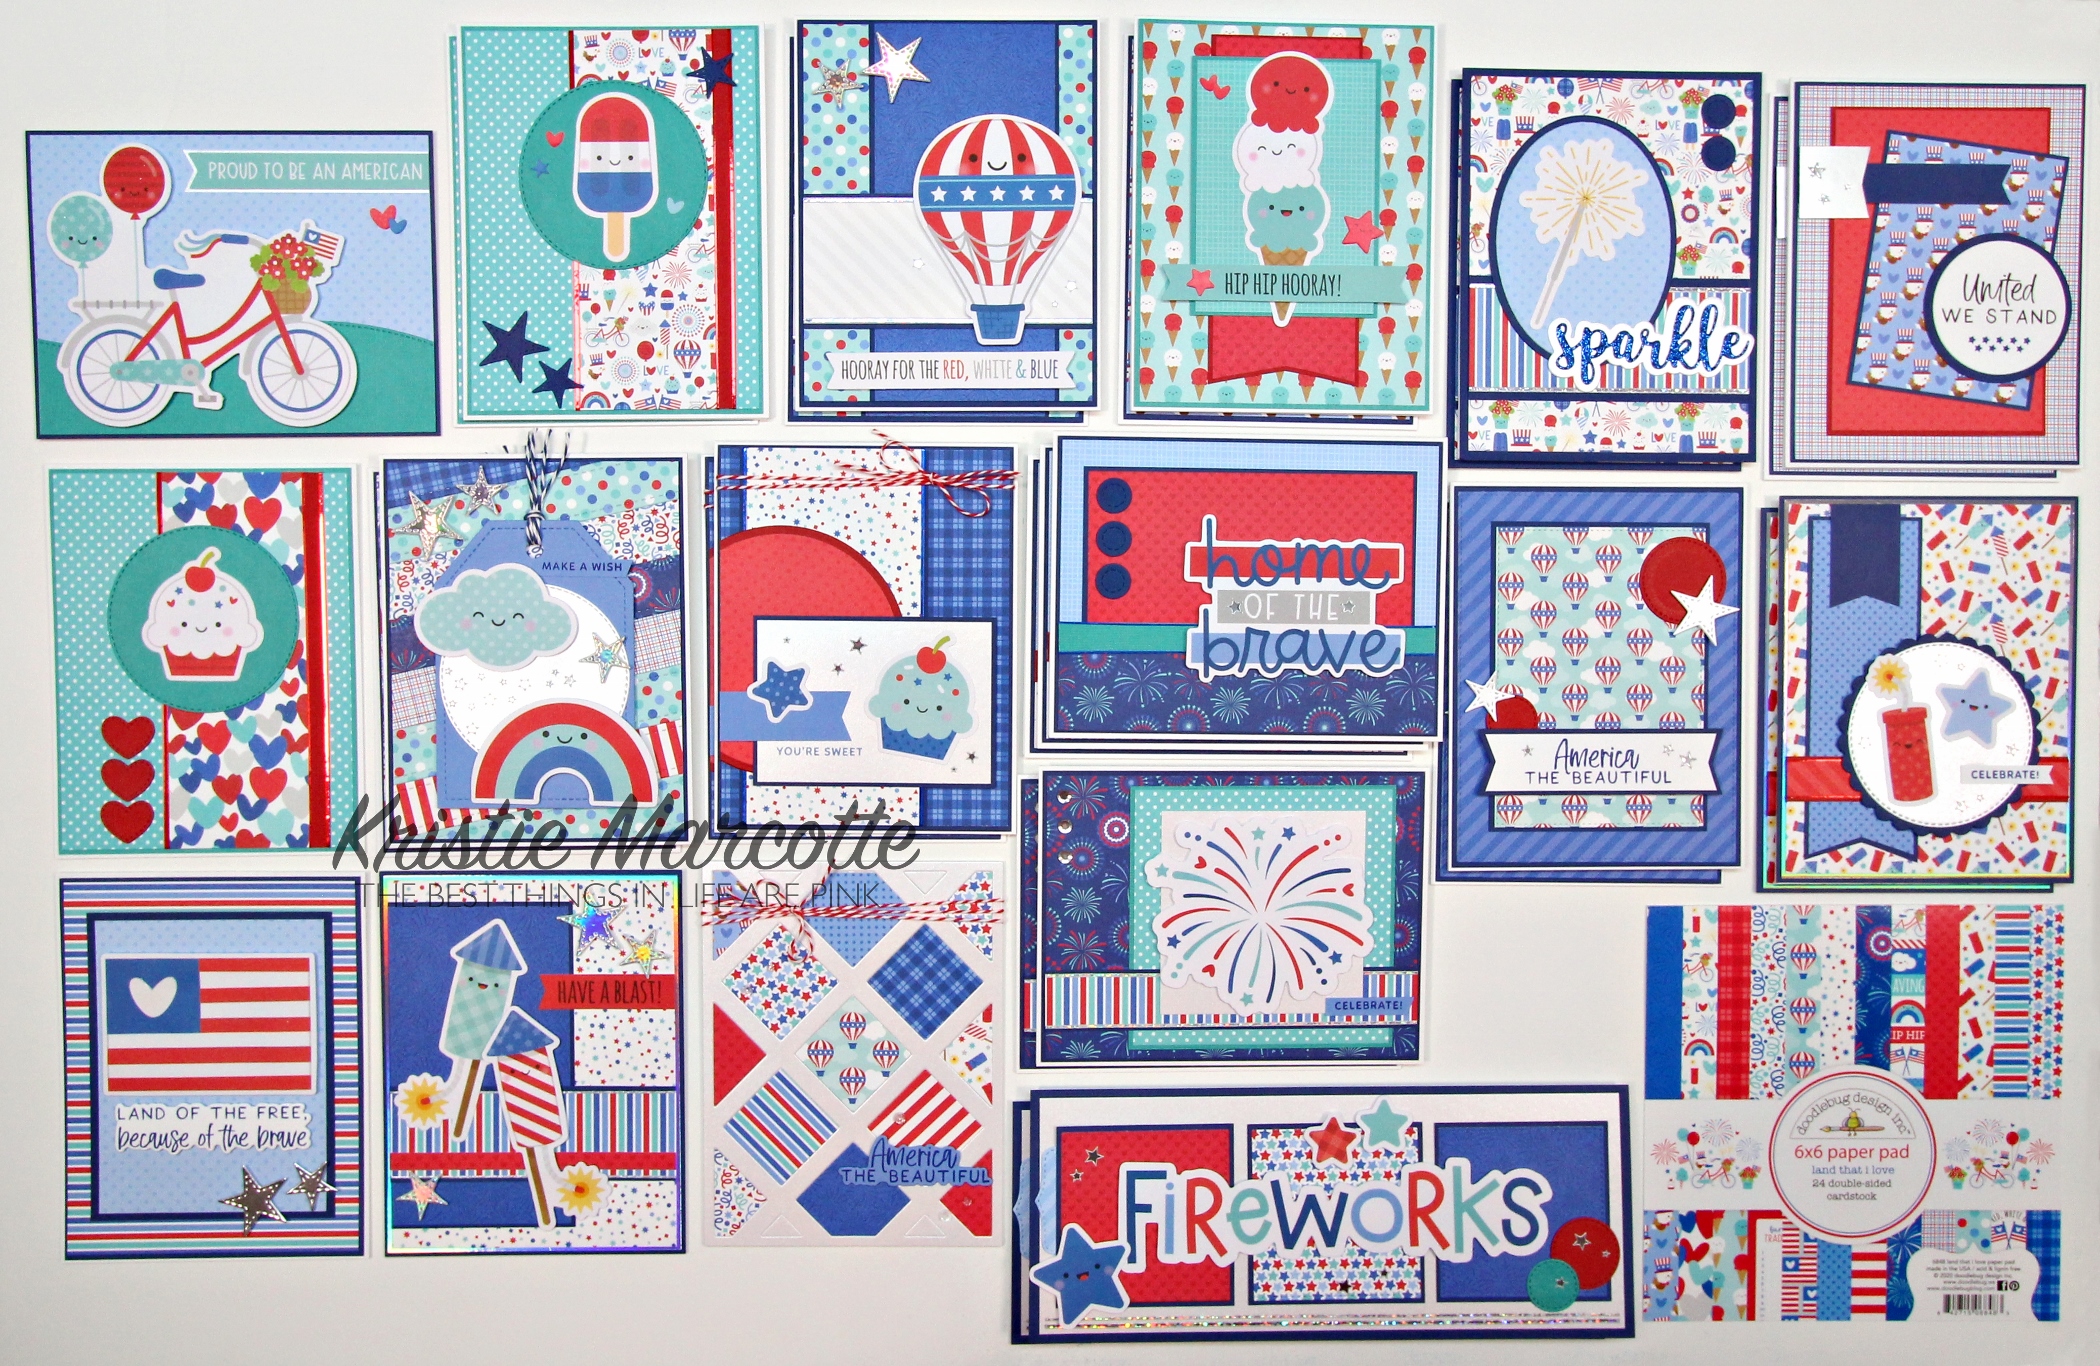 Doodlebug Design – Land that I Love – 30 cards from one 6×6 paper pad